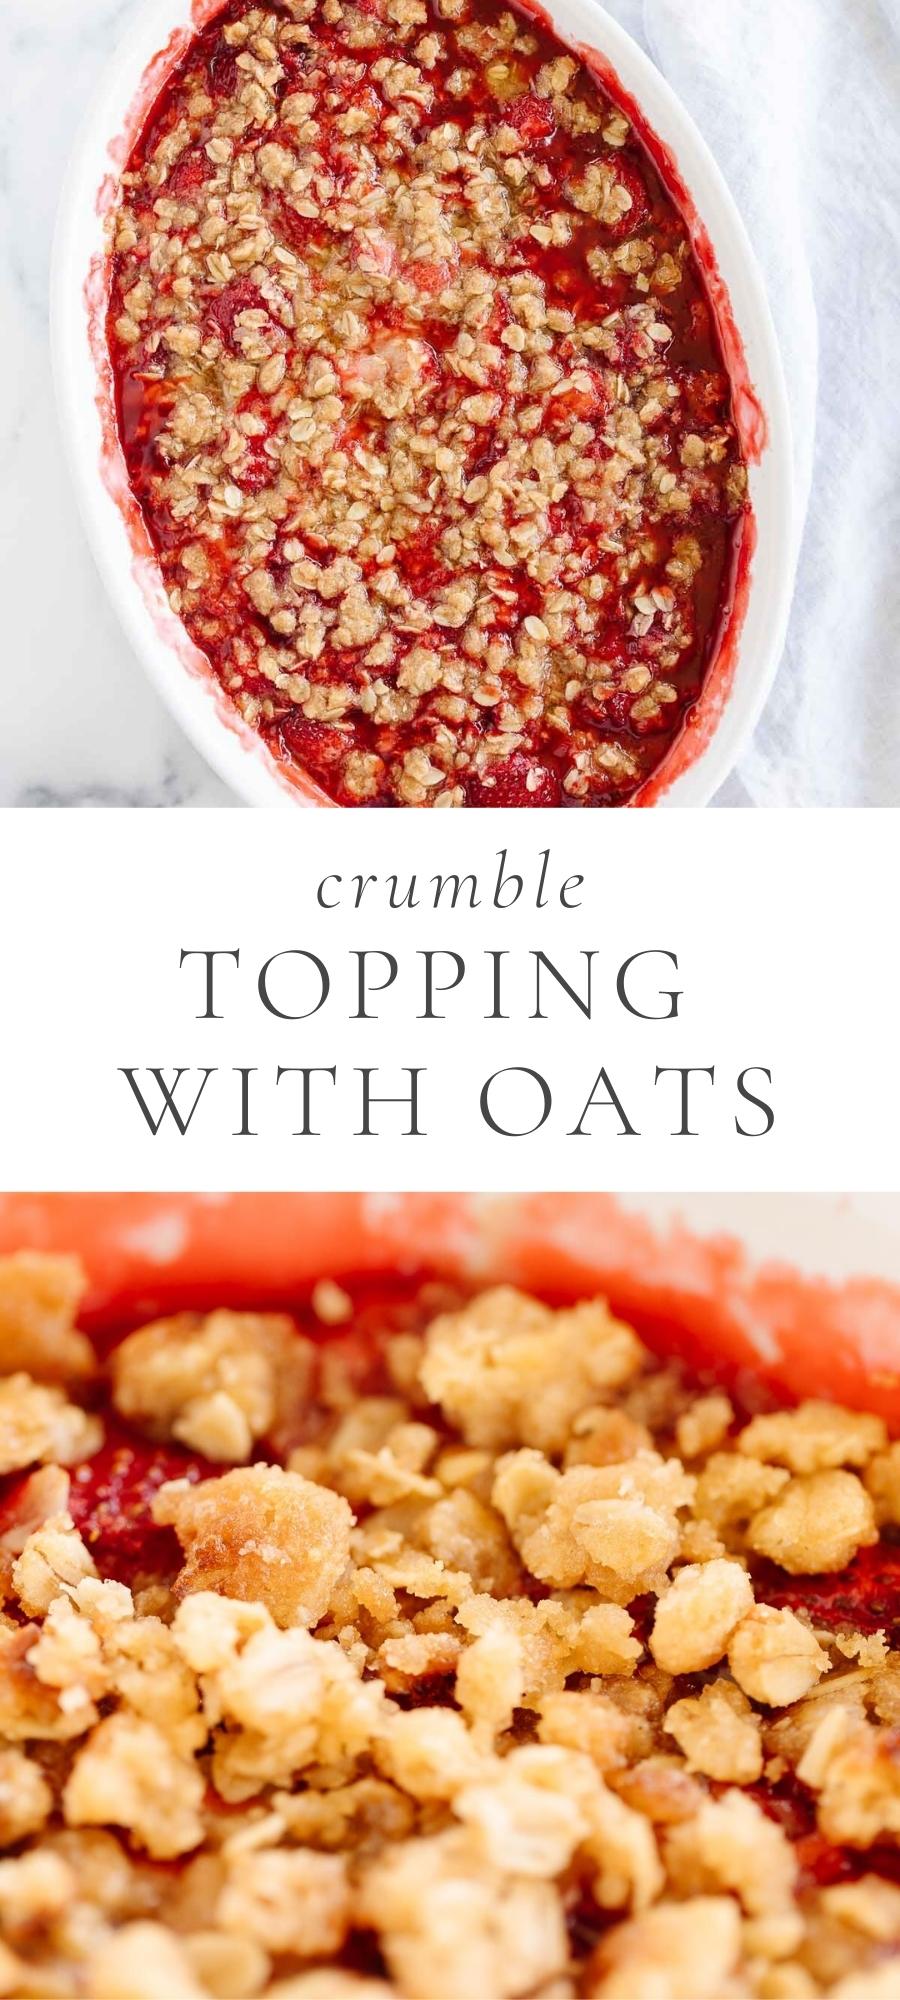 Crumble Topping With Oats